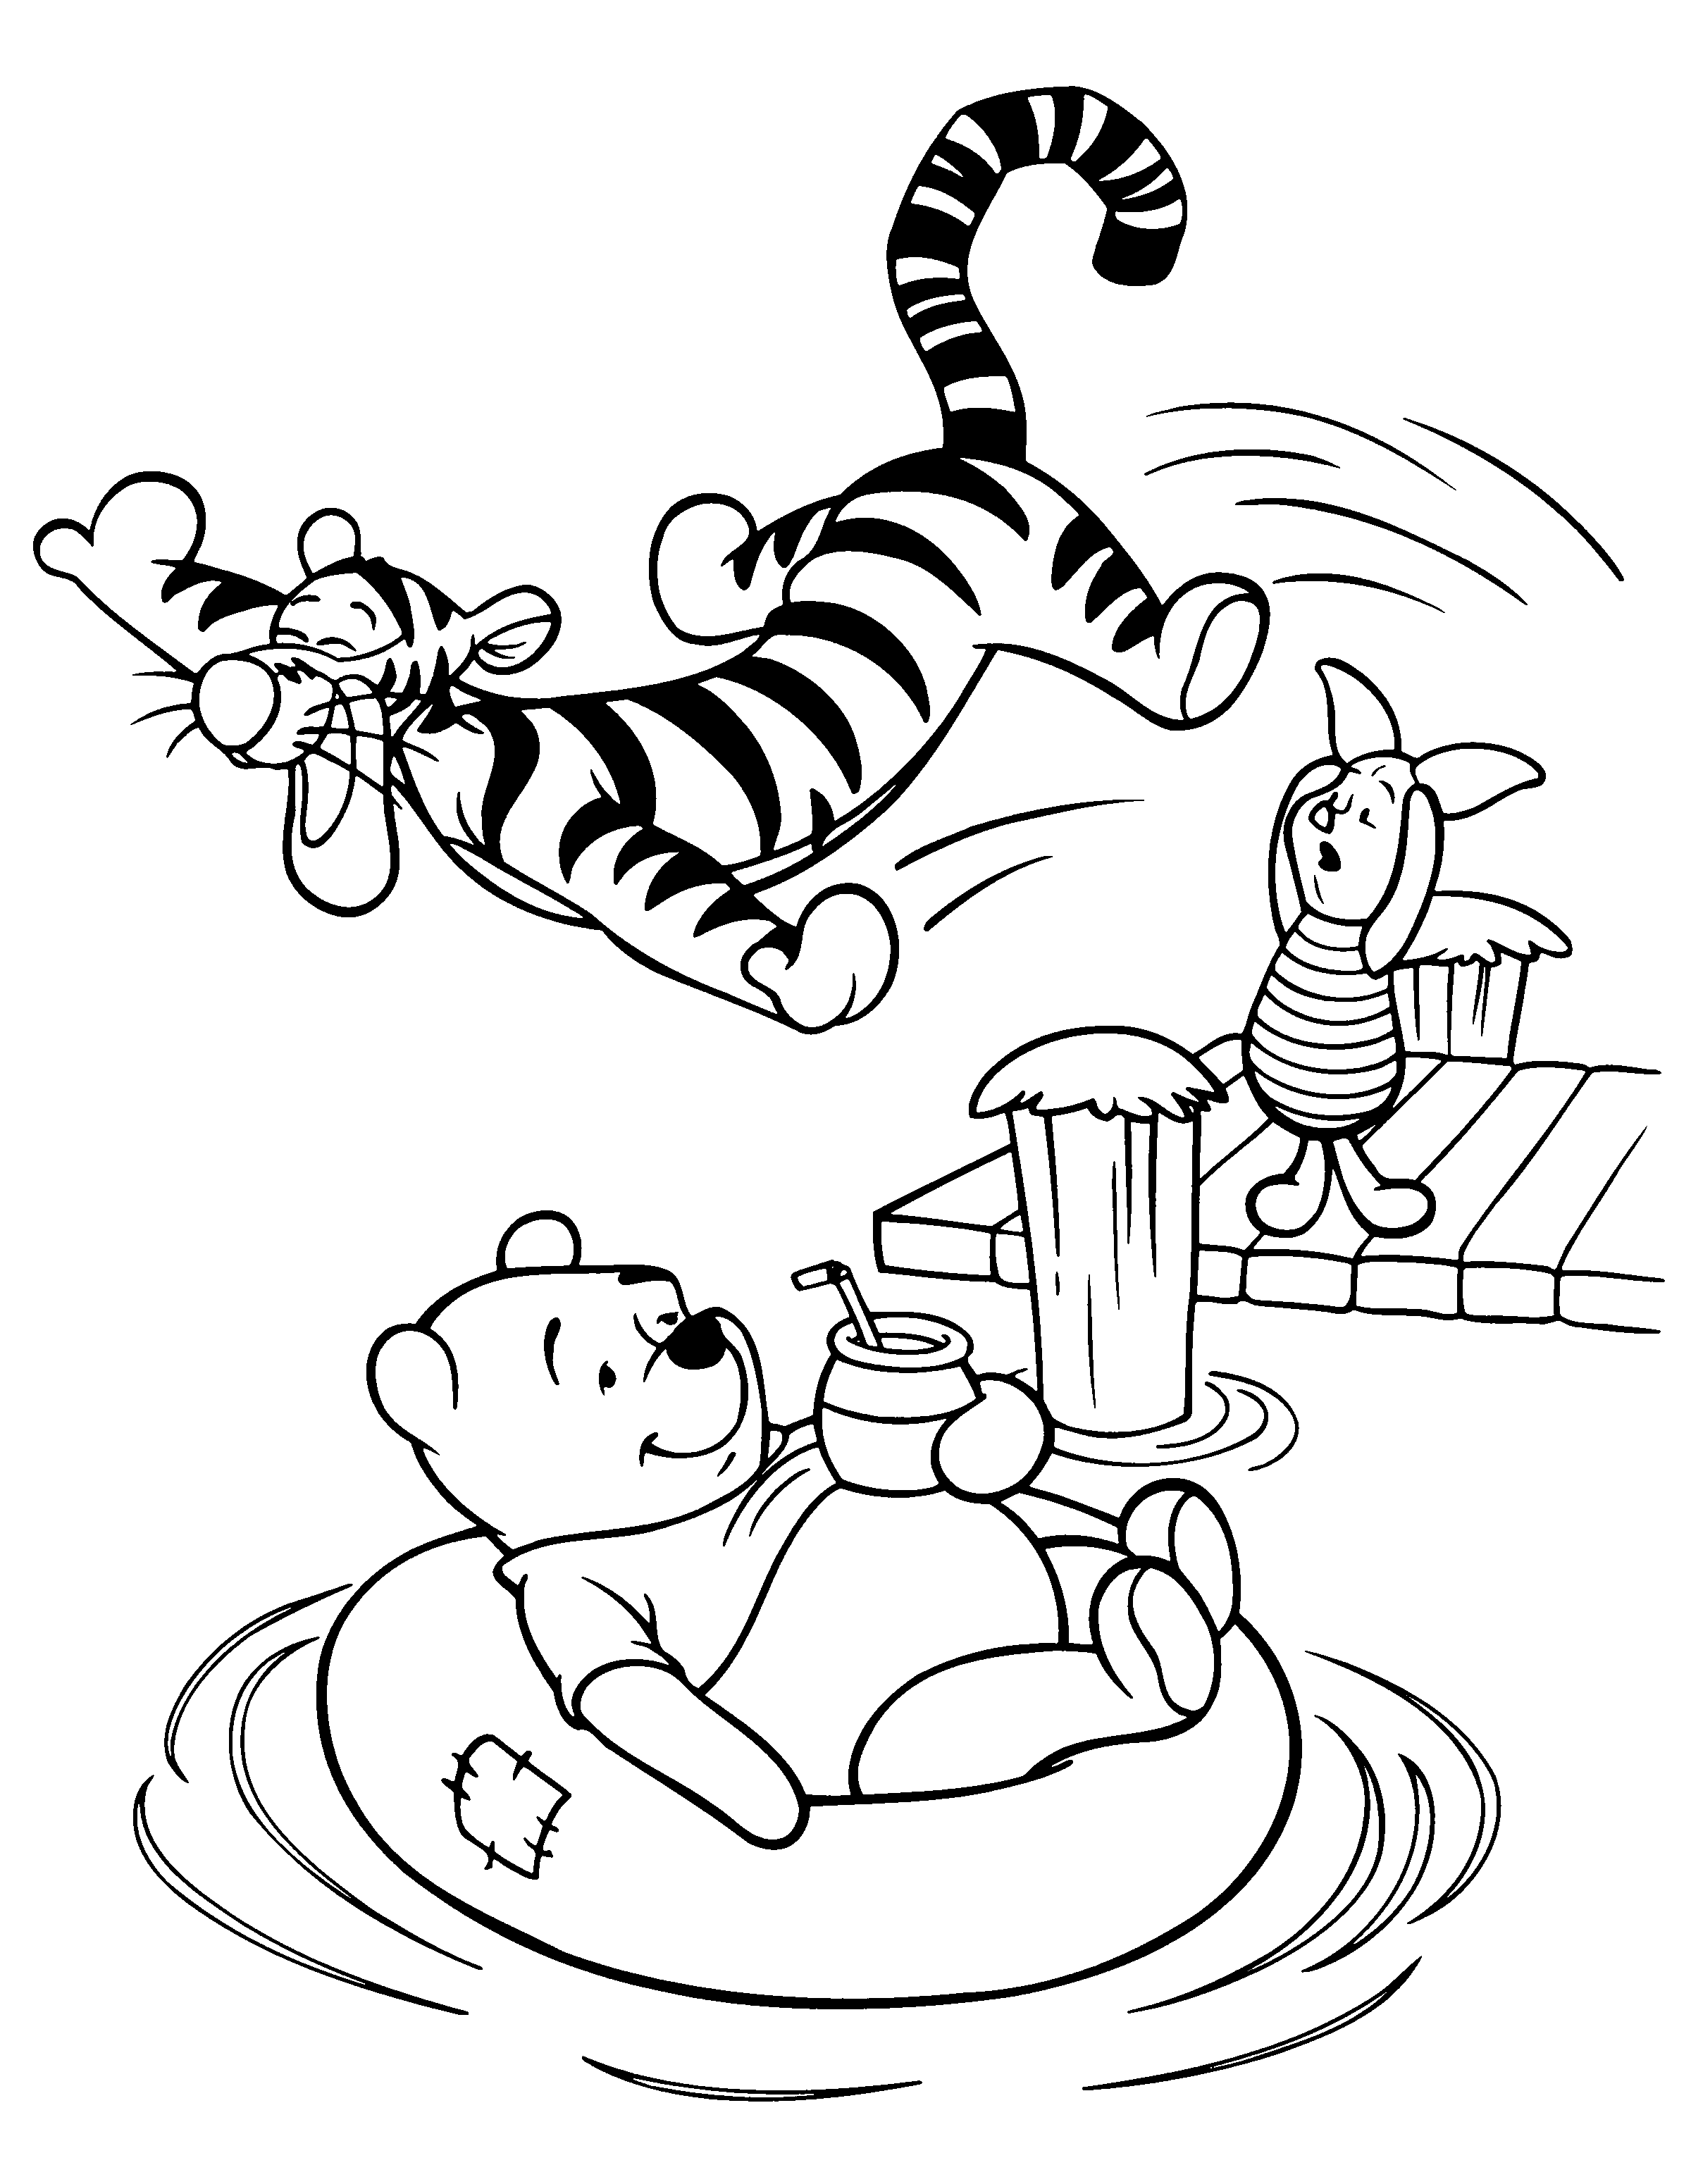 Winnie the pooh Coloring pages Tv series coloring pages